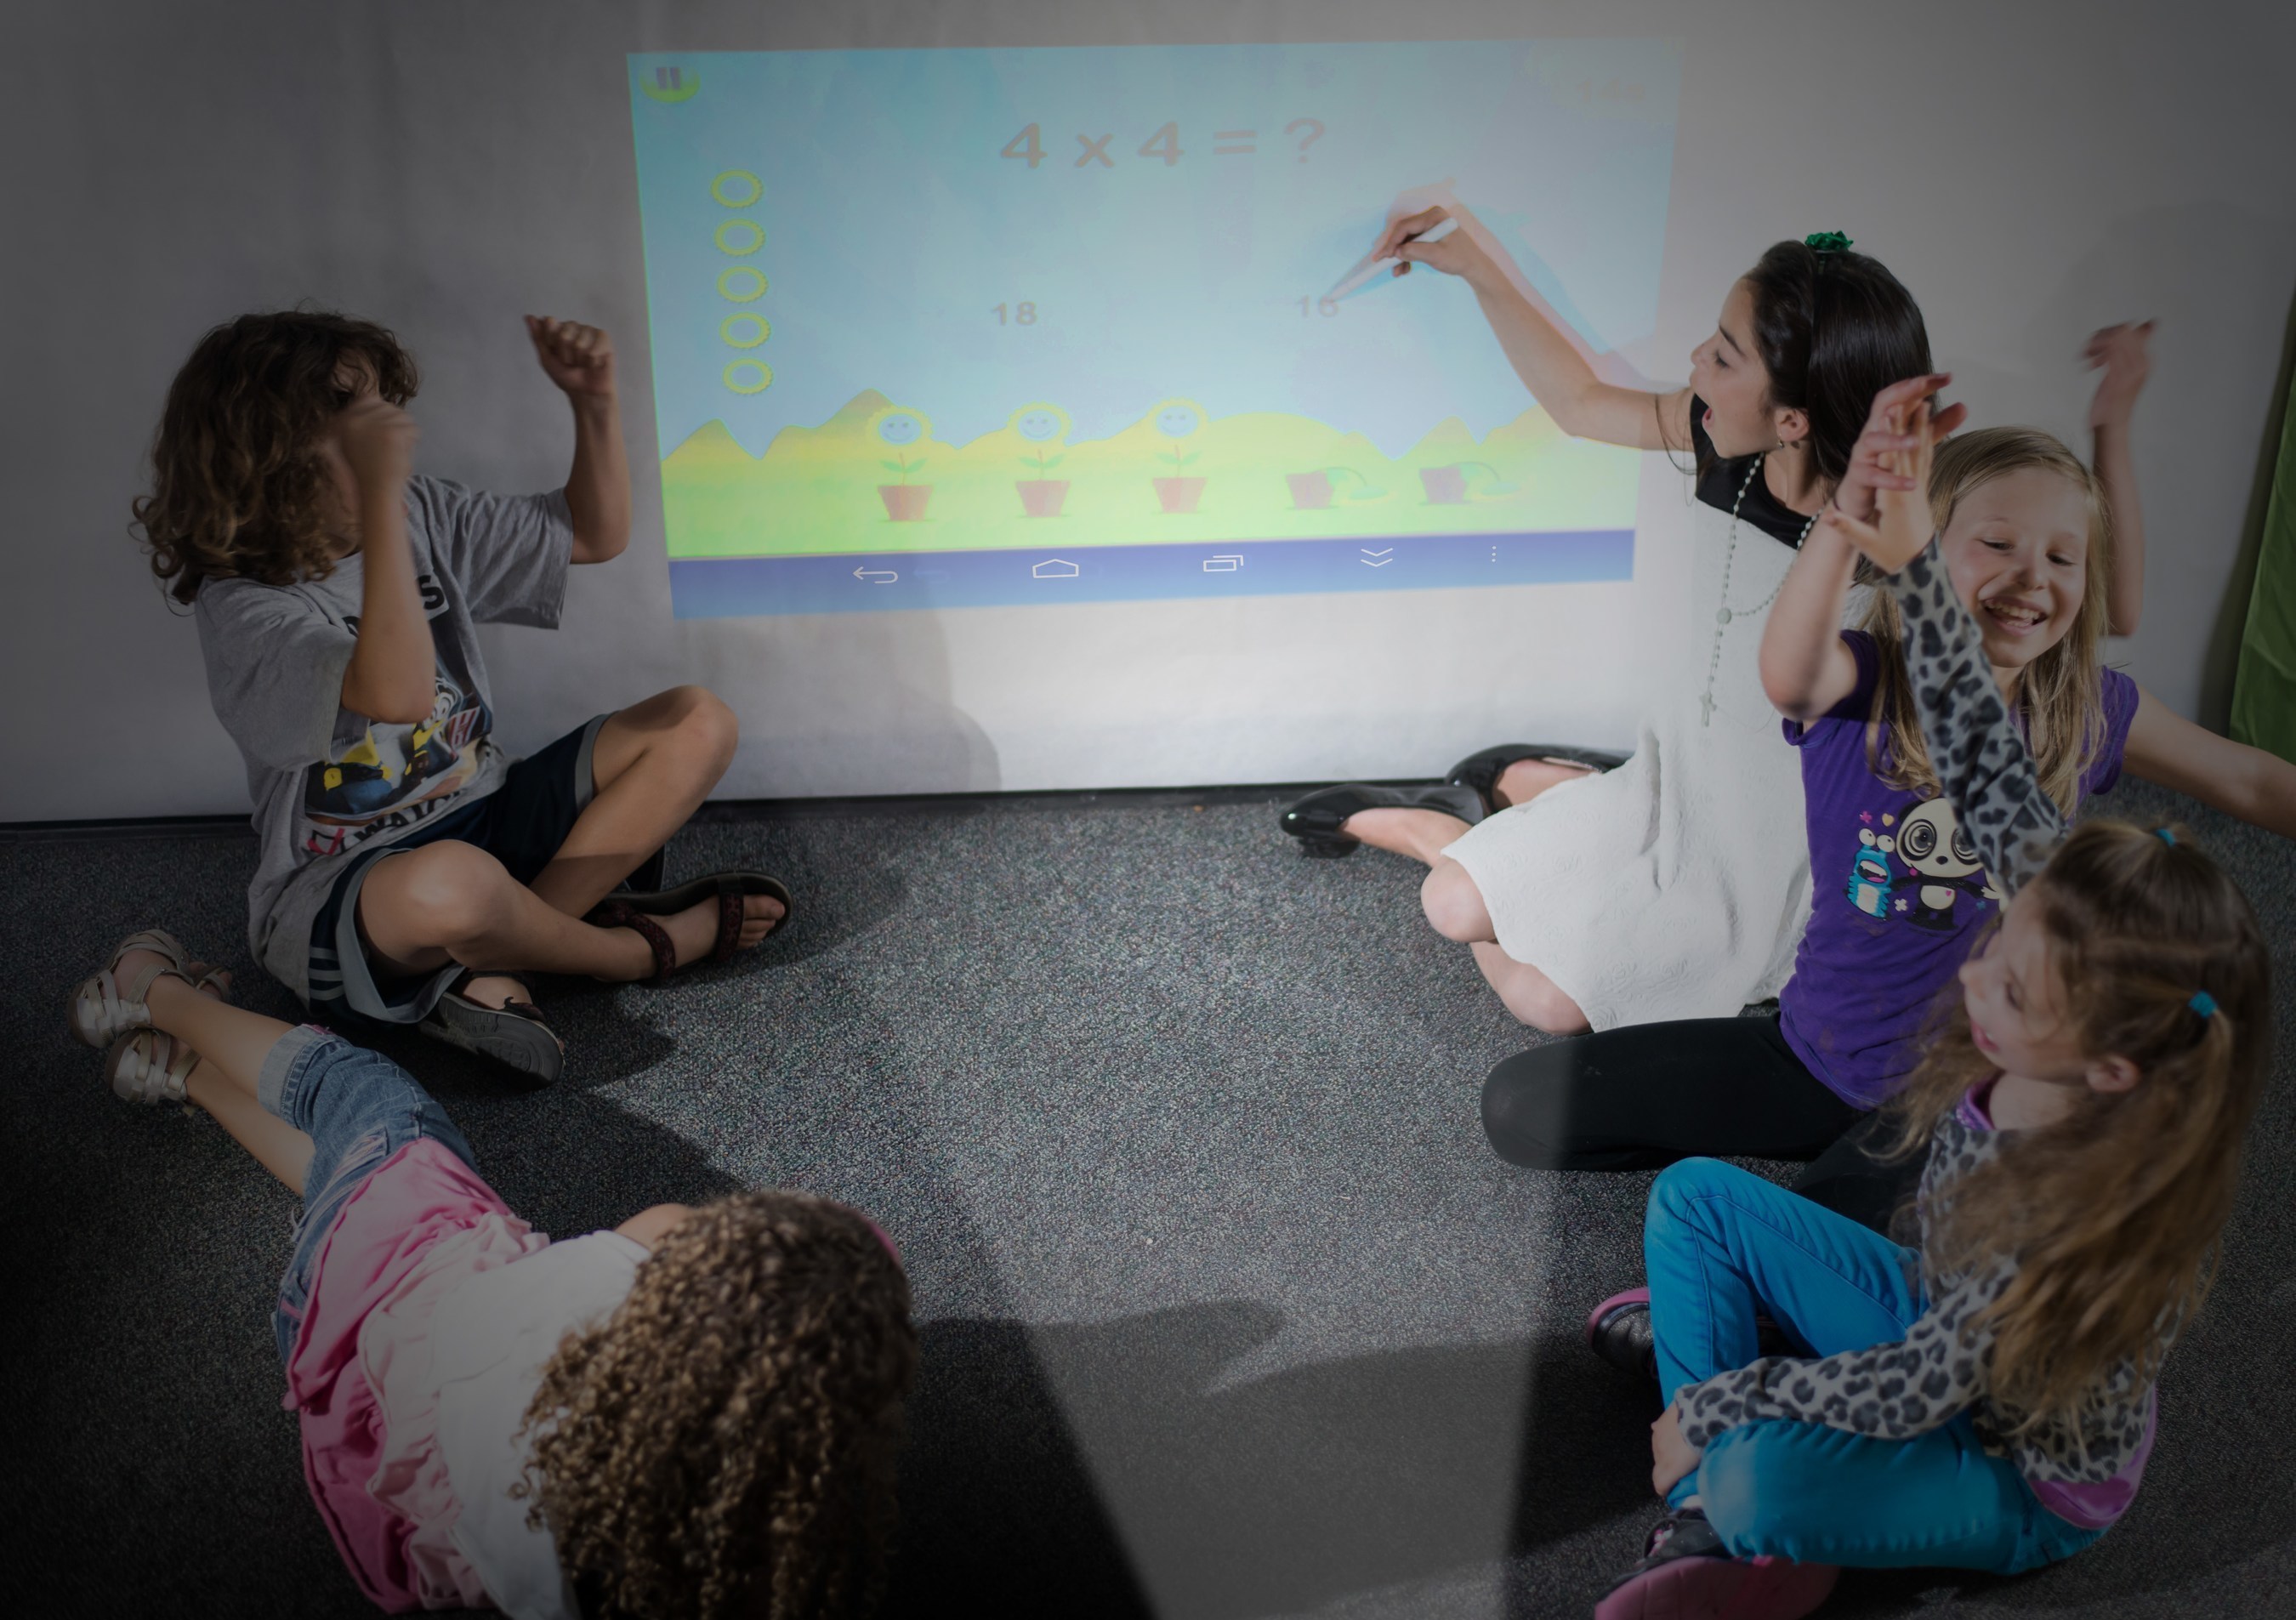 The Touchjet Pond Projector brings collaboration and cooperative learning to classrooms.